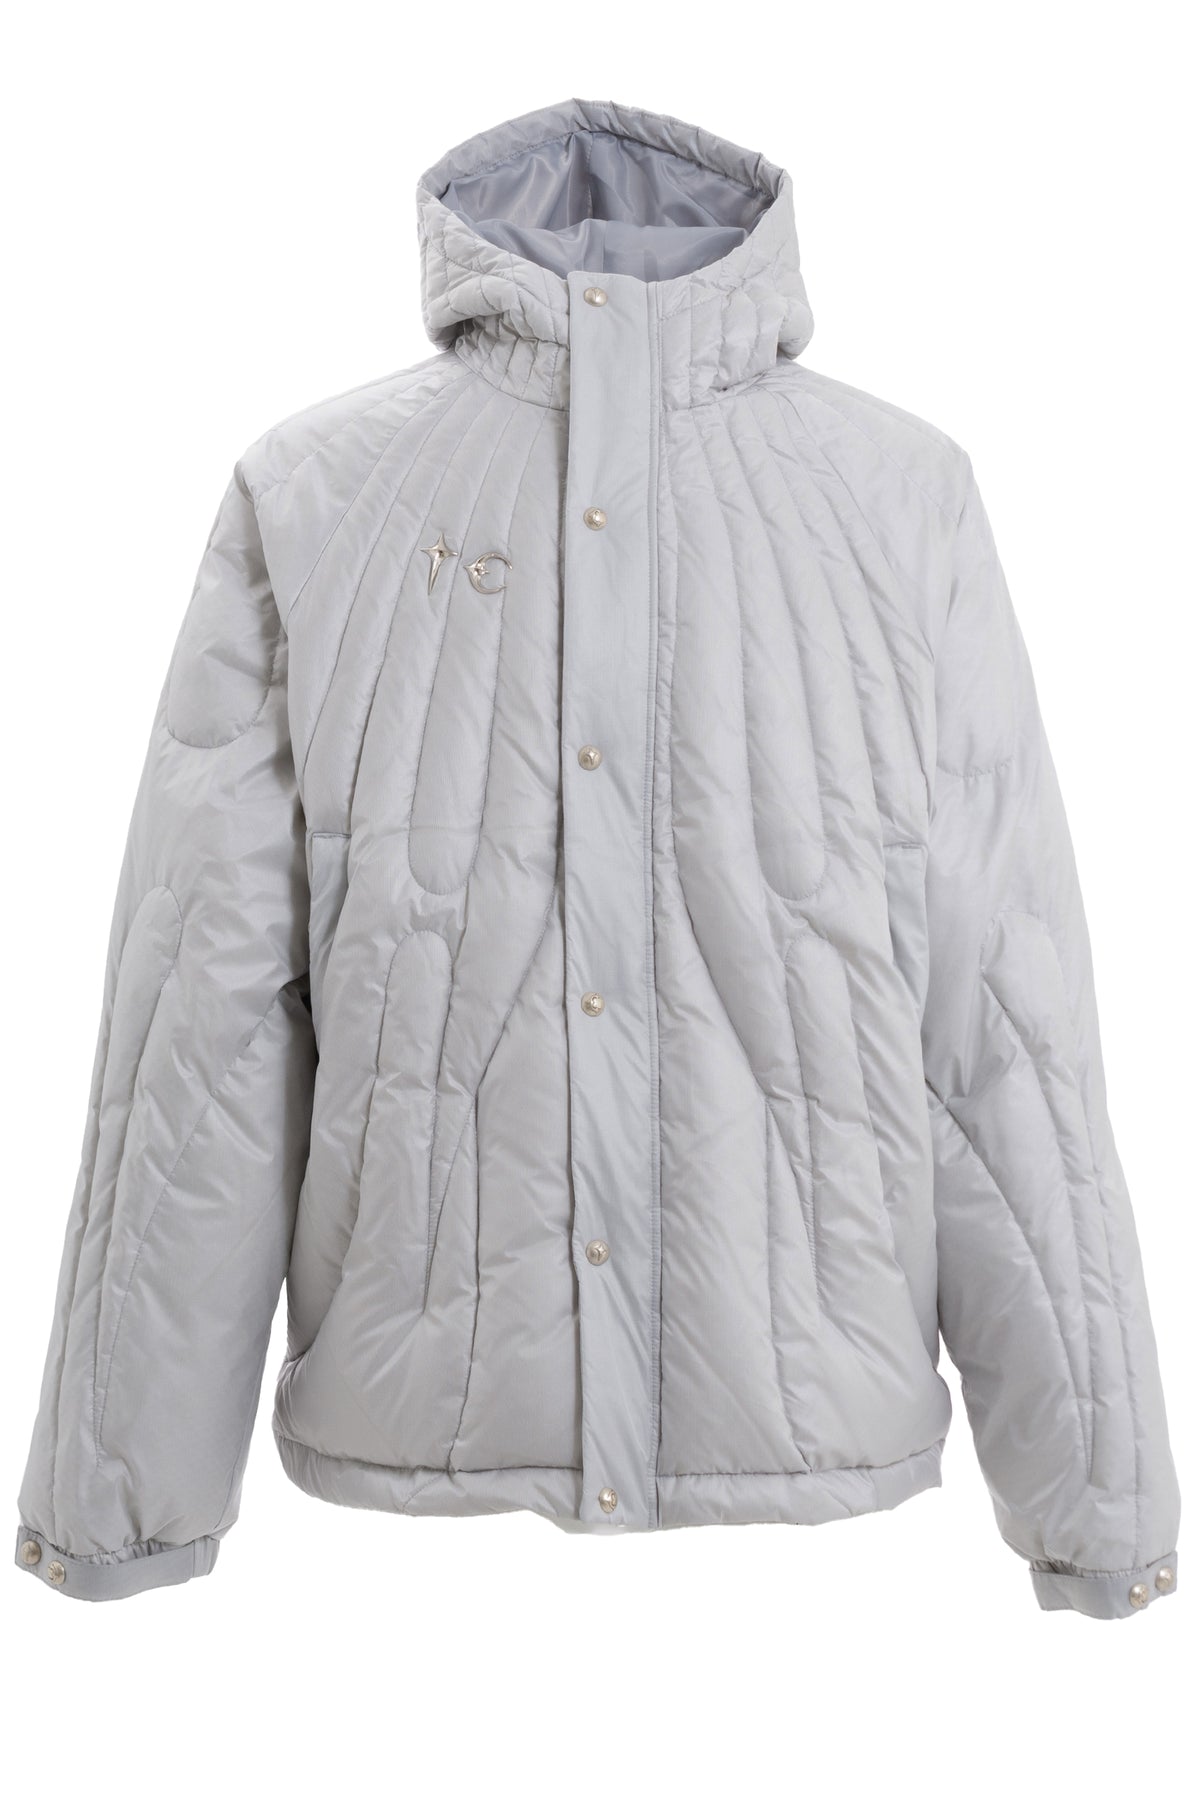 CAVE GOOSE DOWN JACKET / SIL